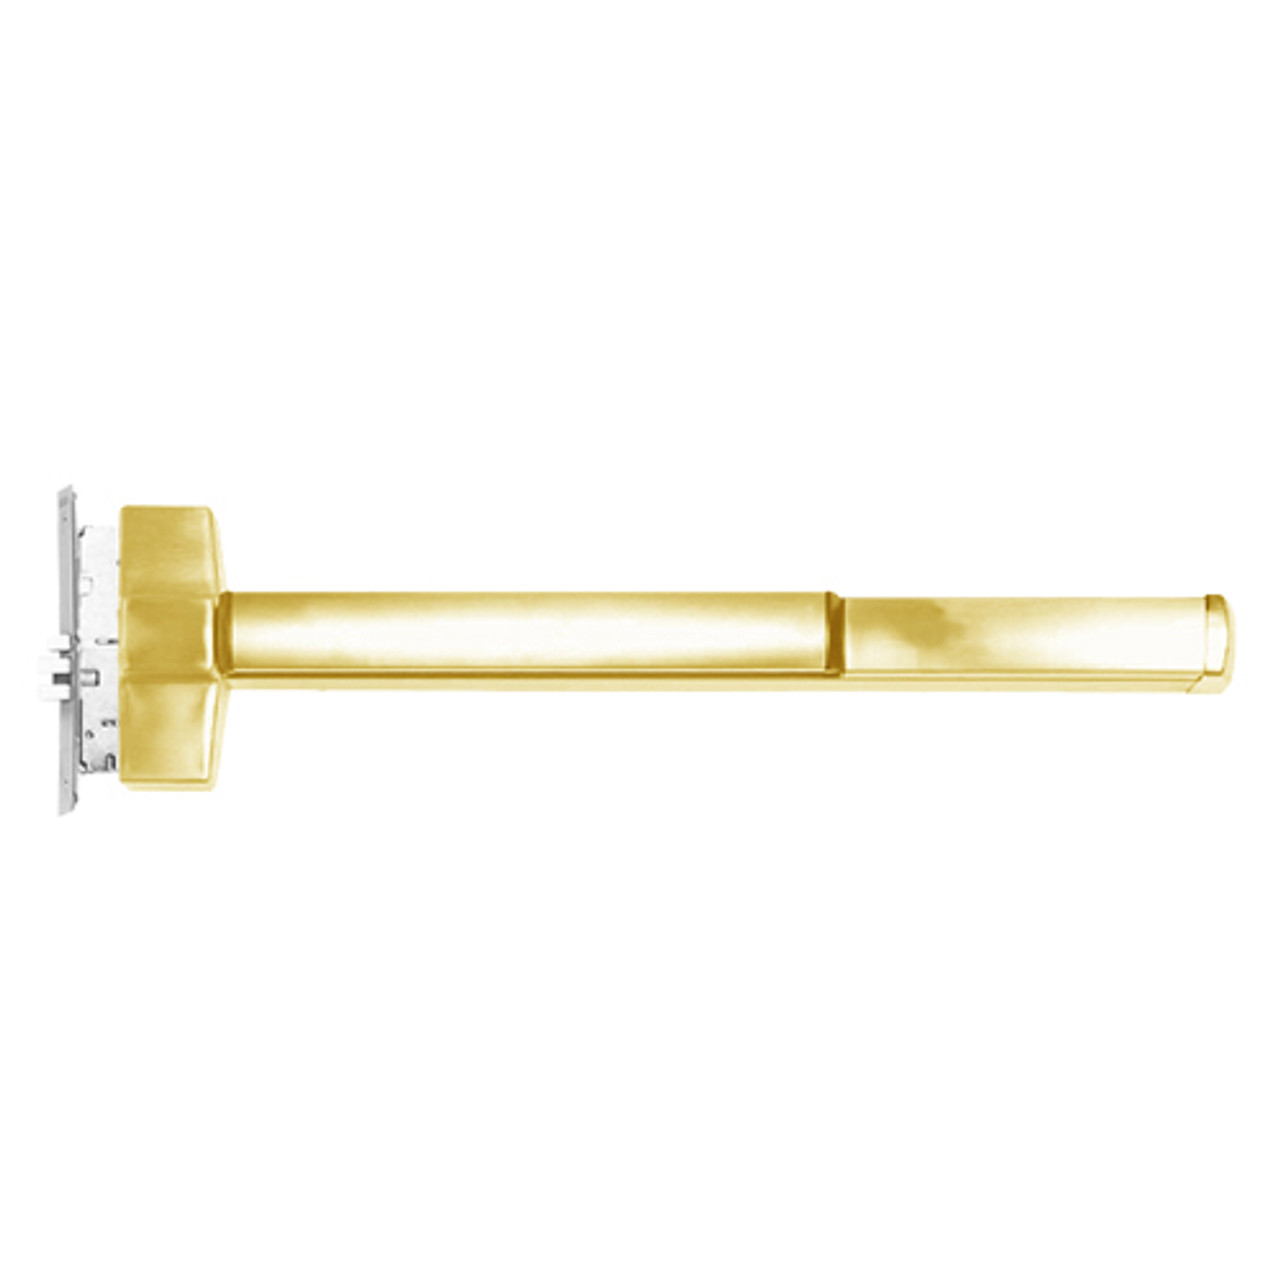 ED5600ATD-605-LHR Corbin ED5600 Series Fire Rated Mortise Exit Device with Delayed Egress in Bright Brass Finish